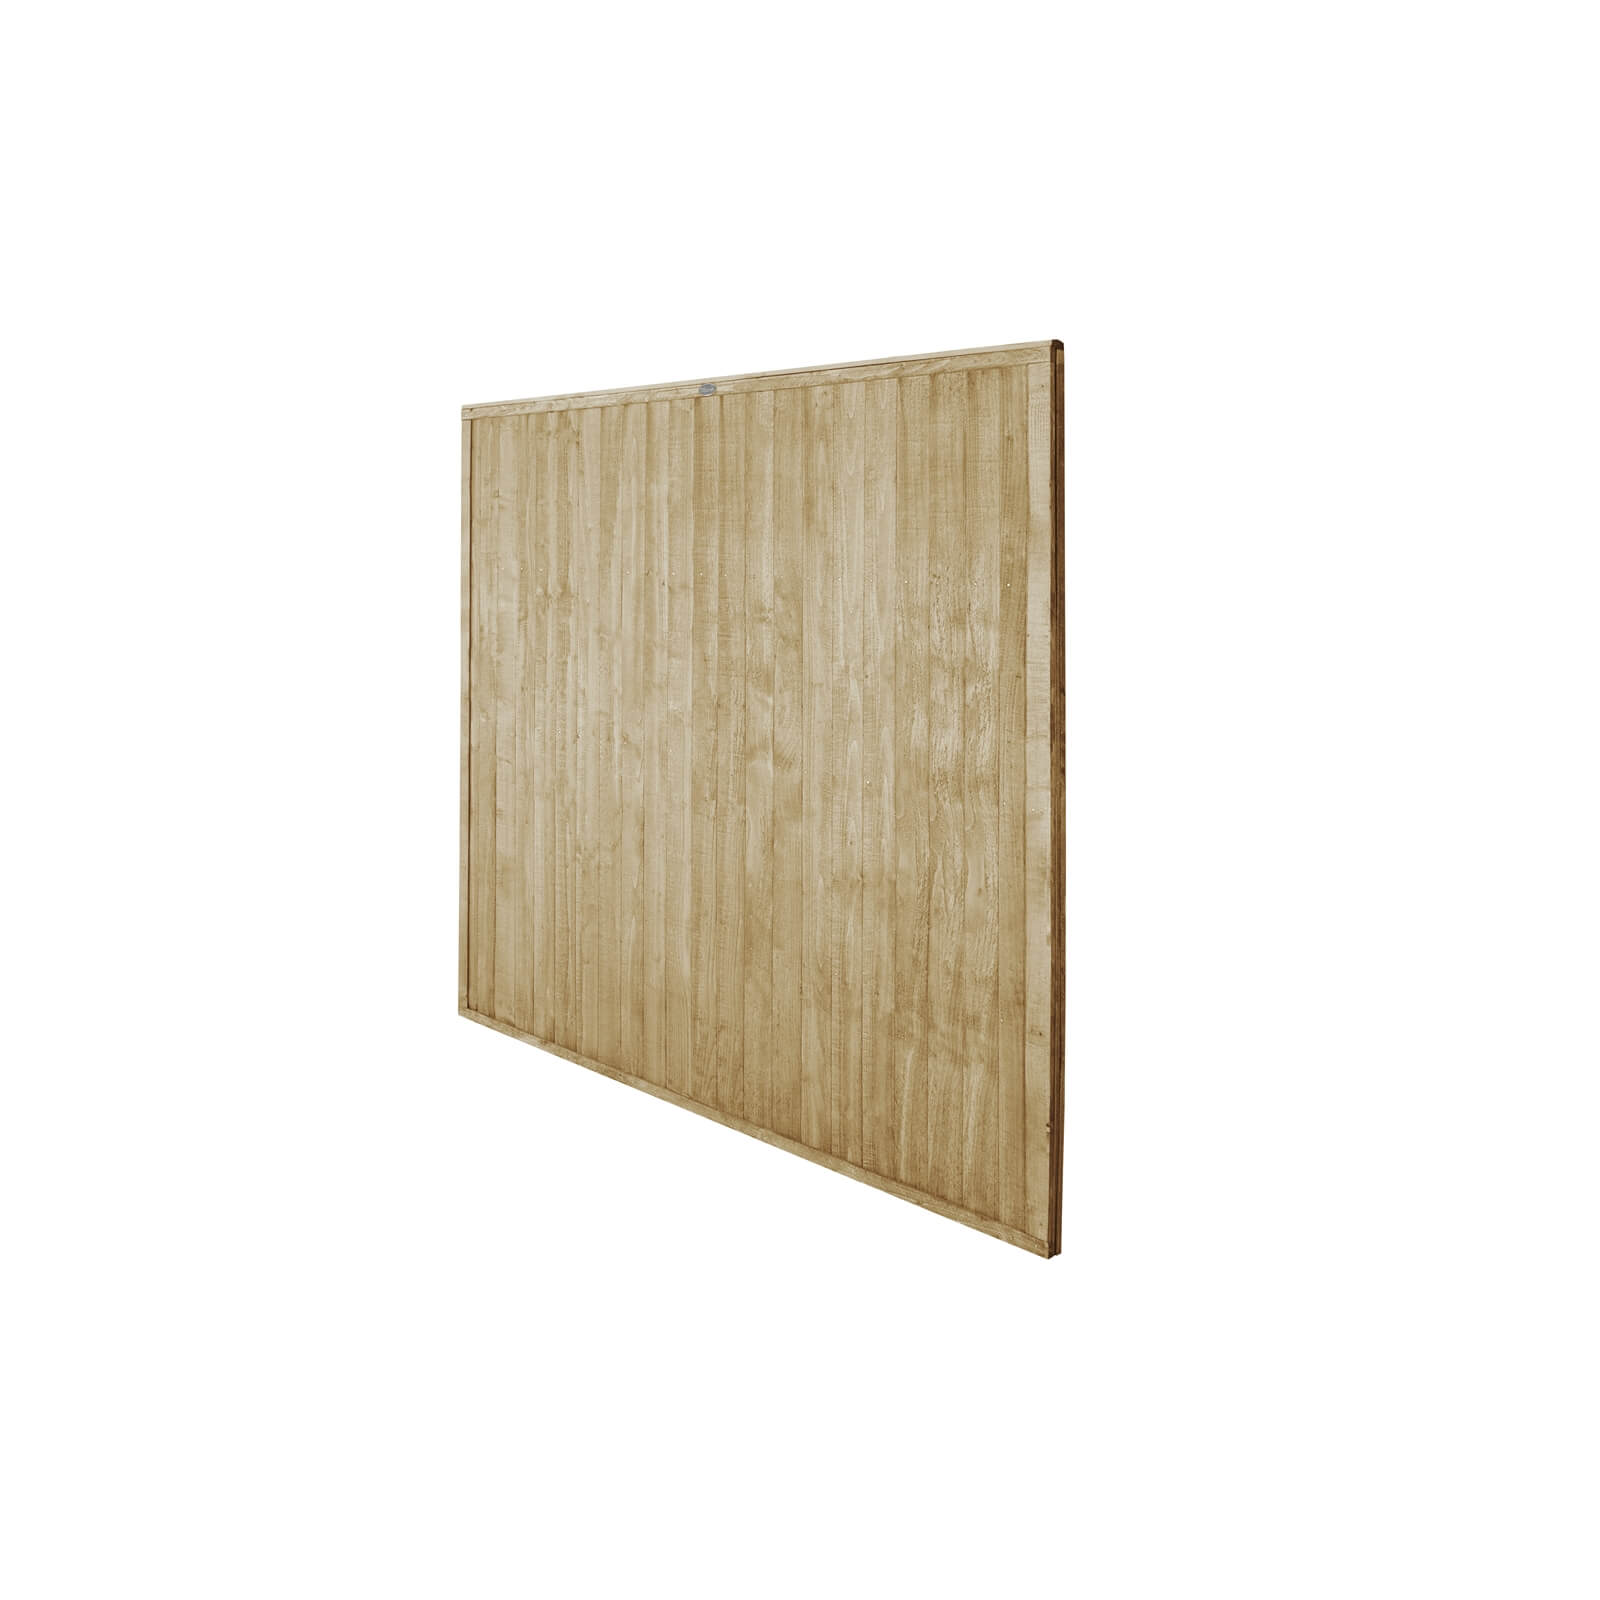 Photo of 6ft X 6ft -1.83m X 1.83m- Pressure Treated Closeboard Fence Panel - Pack Of 4